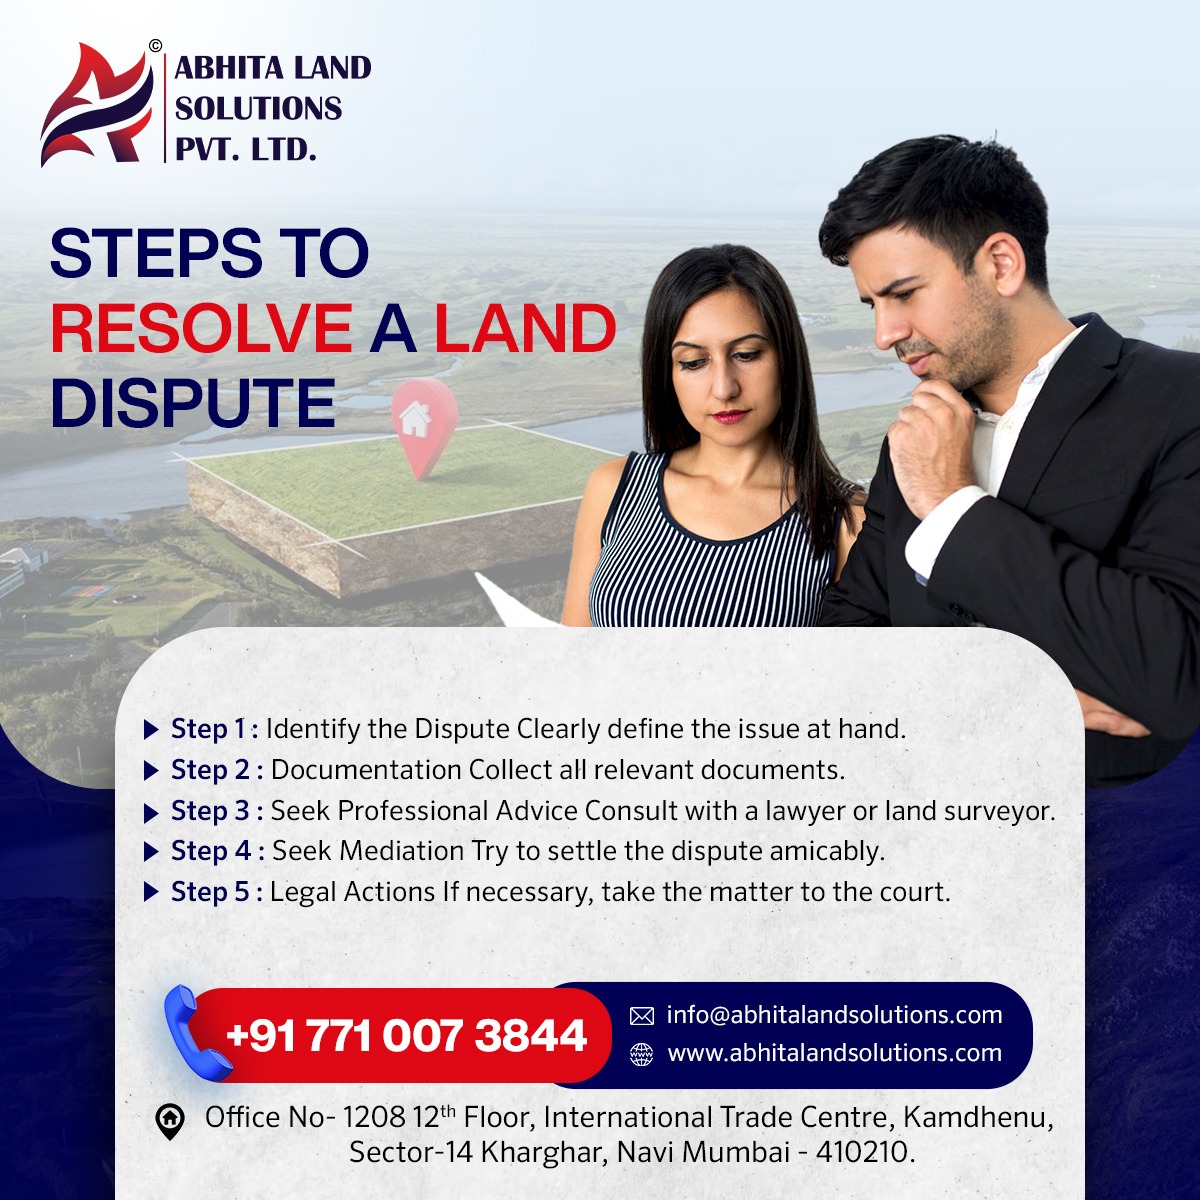 Follow these essential steps to resolve a land dispute effectively

#LandDisputes #LandProtection #LandMatters #PropertyRights #LandRights #LegalAdvice #LegalServices #LegalSolutions #landsolution #landservice #LegalExperts #abhitalandsolutions #pune #kharghar #navimumbai